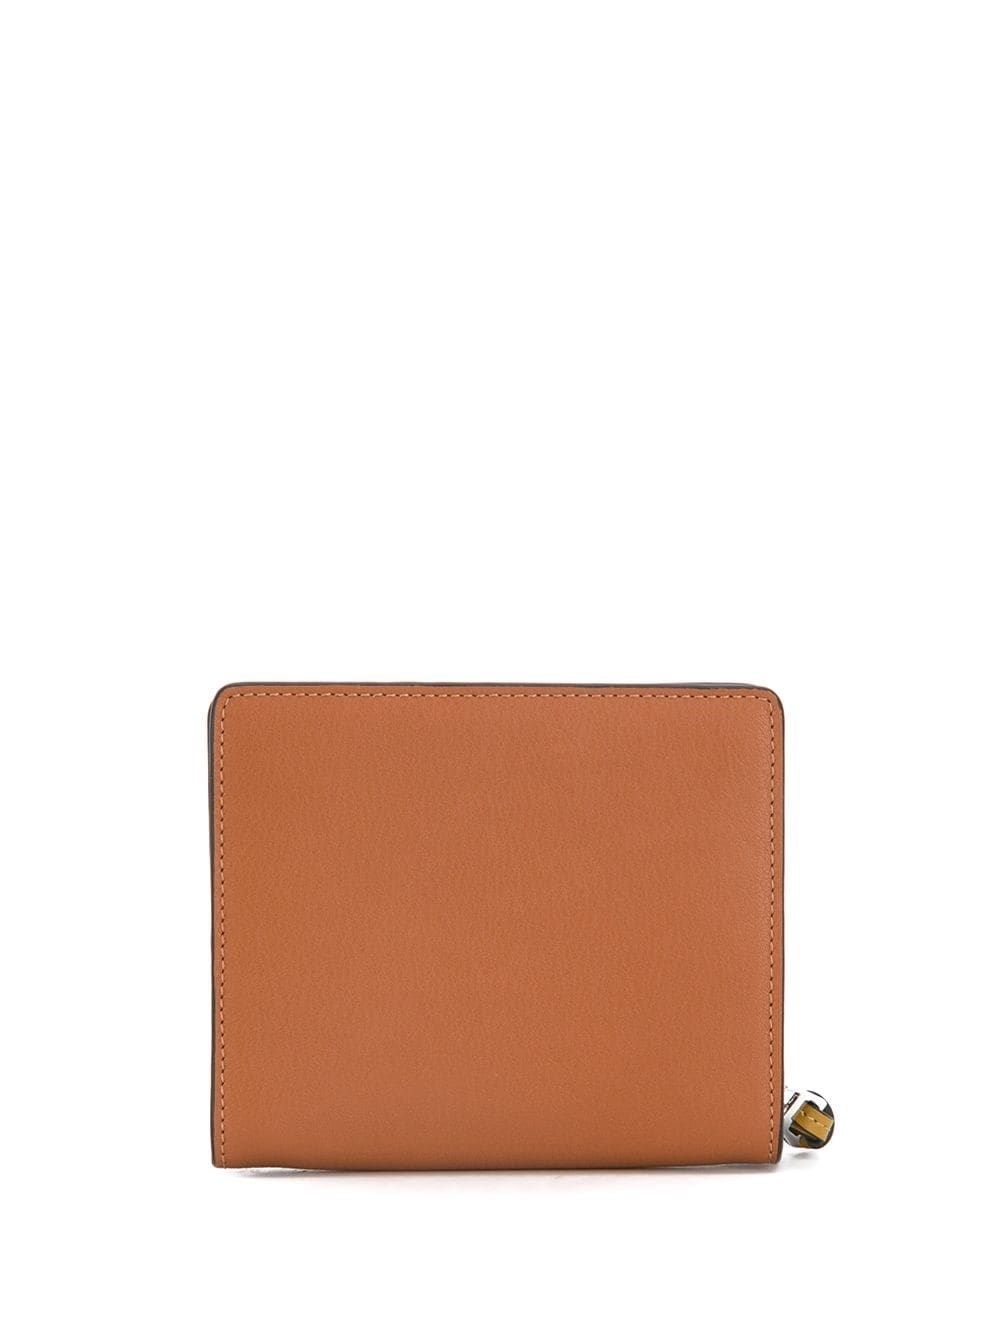 loewe ANAGRAM WALLET available on montiboutique.com - 37561